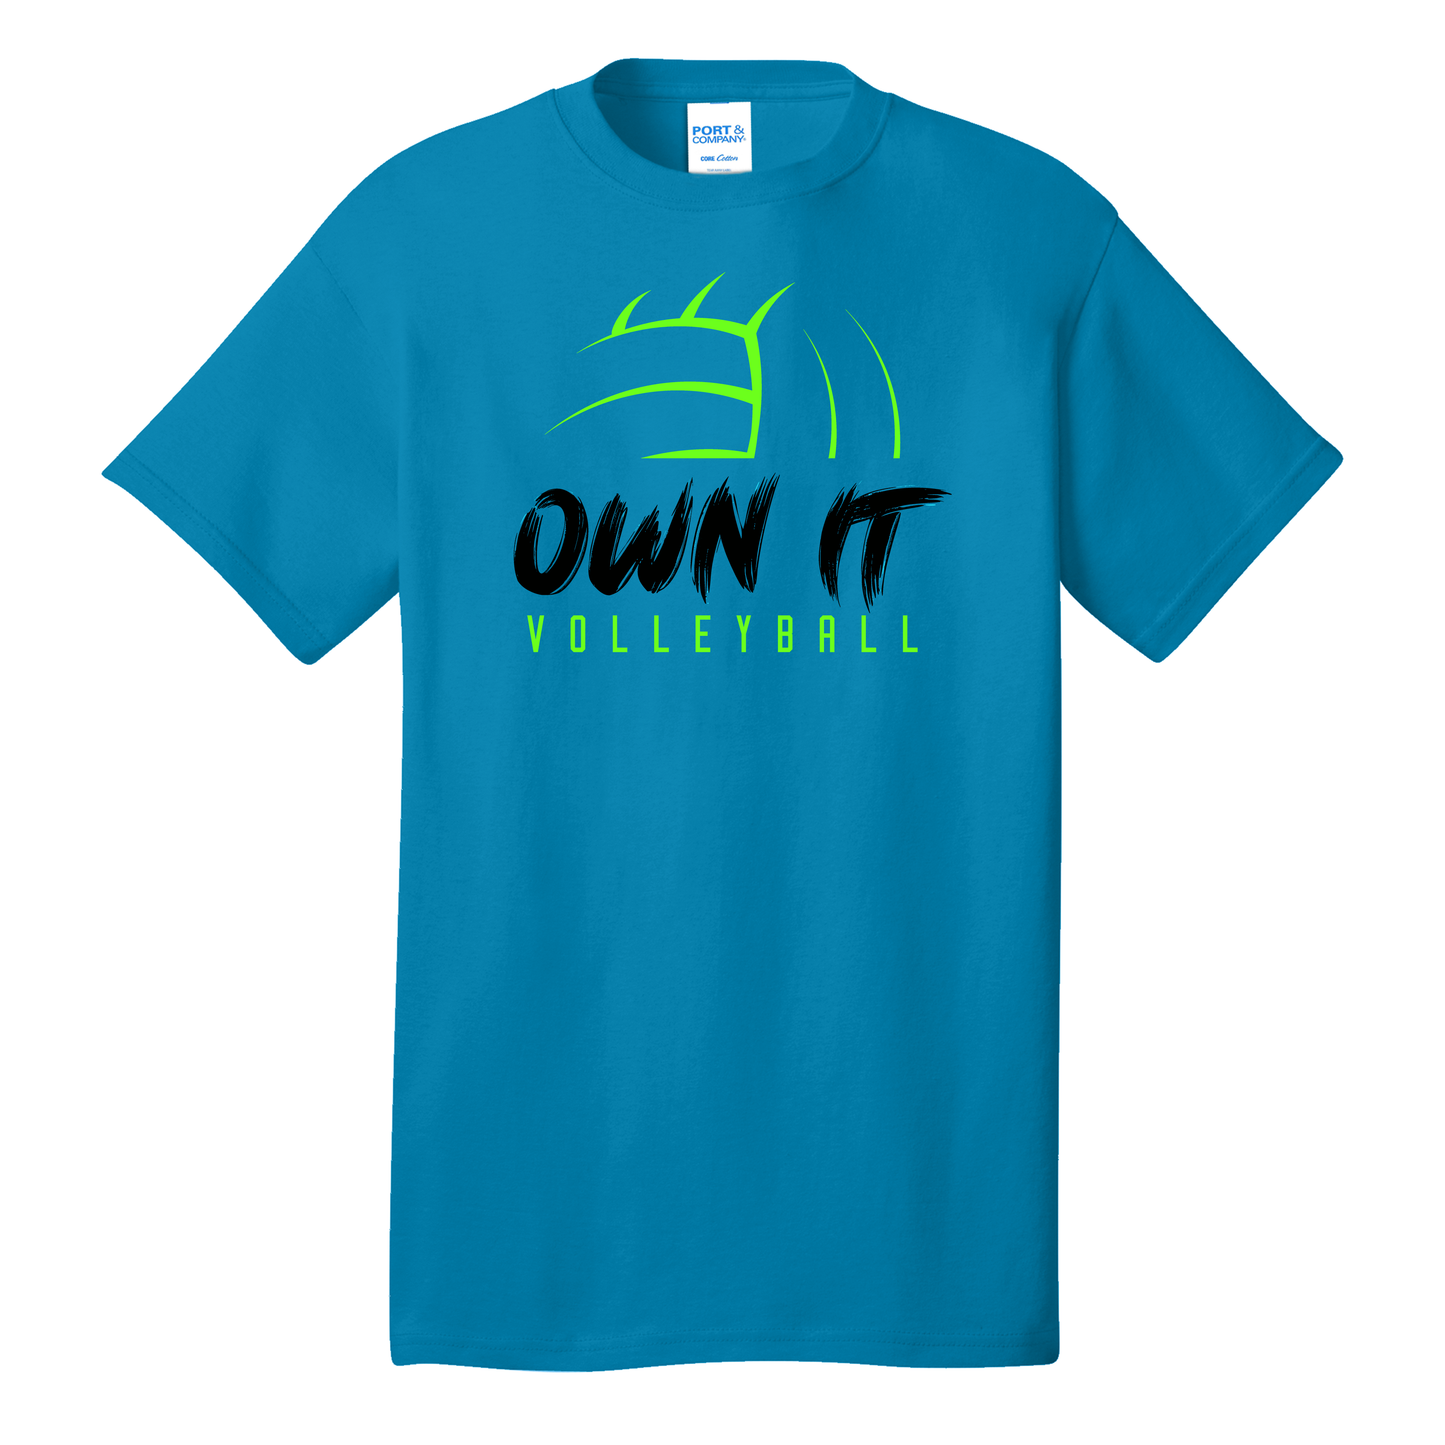 Own It Volleyball Club Short Sleeve Tee (Adult ) Multiple Colors Available